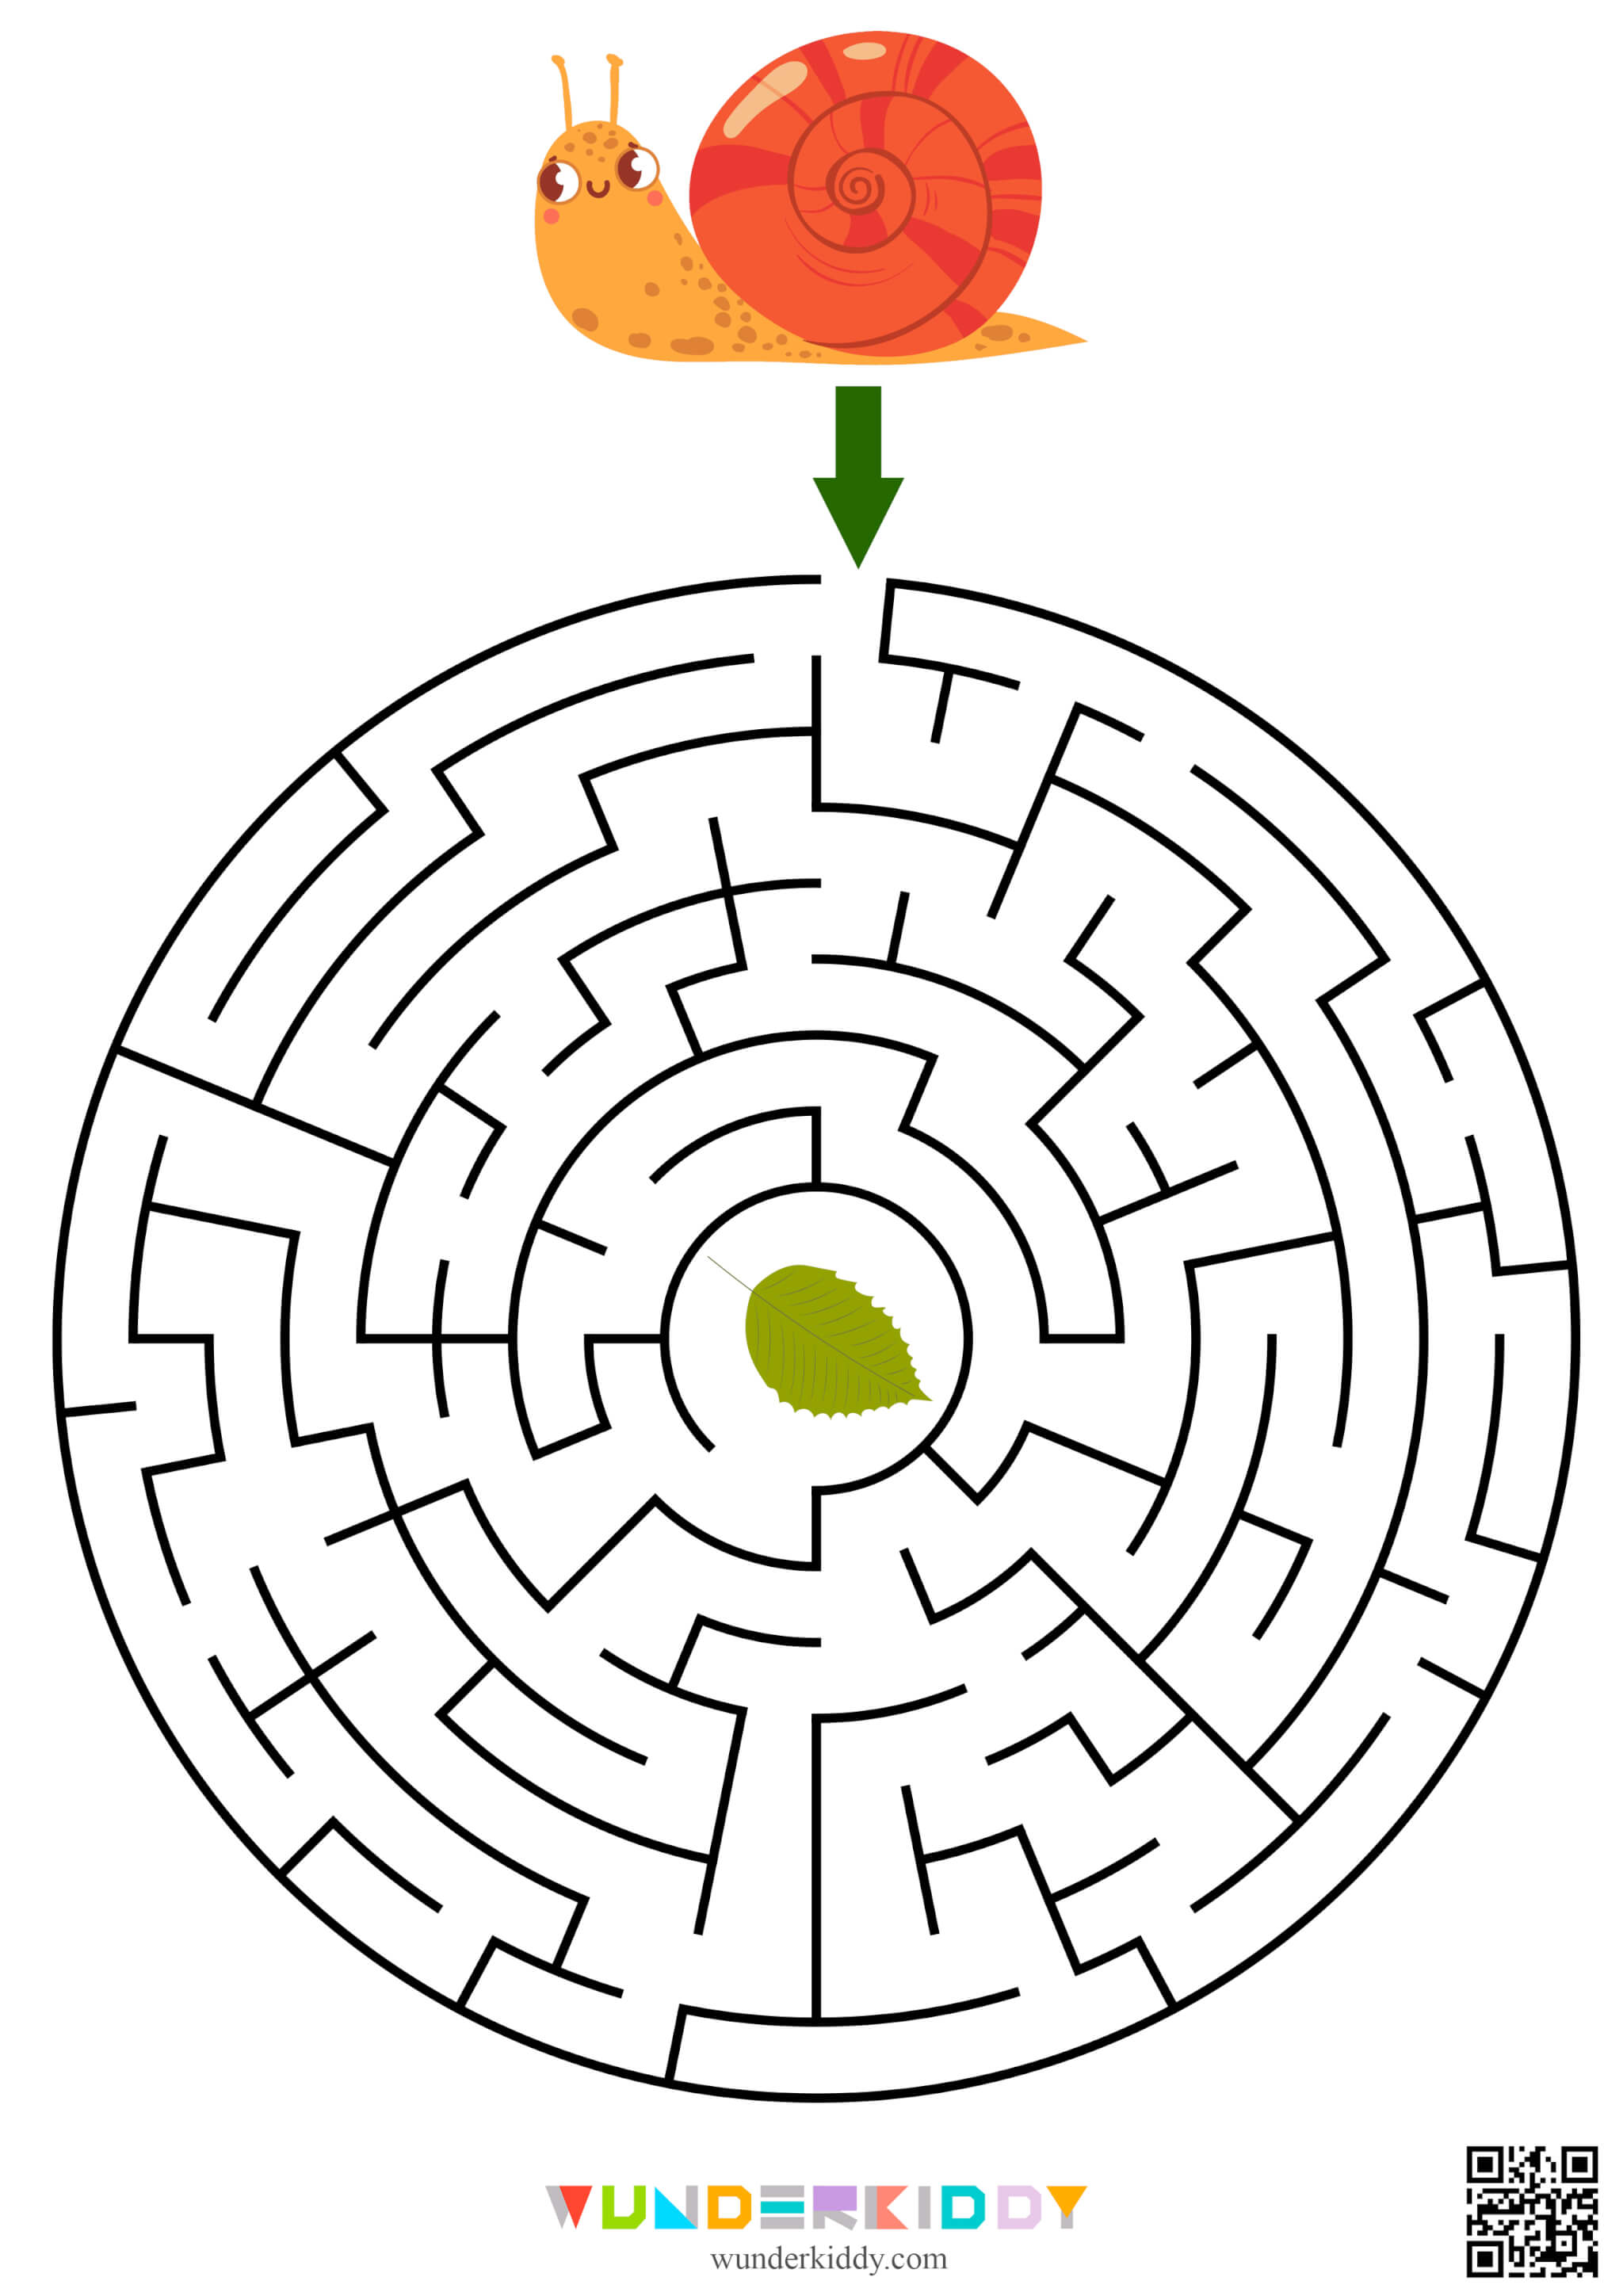 Printable Maze for Kids Help to Find the Way - Image 2